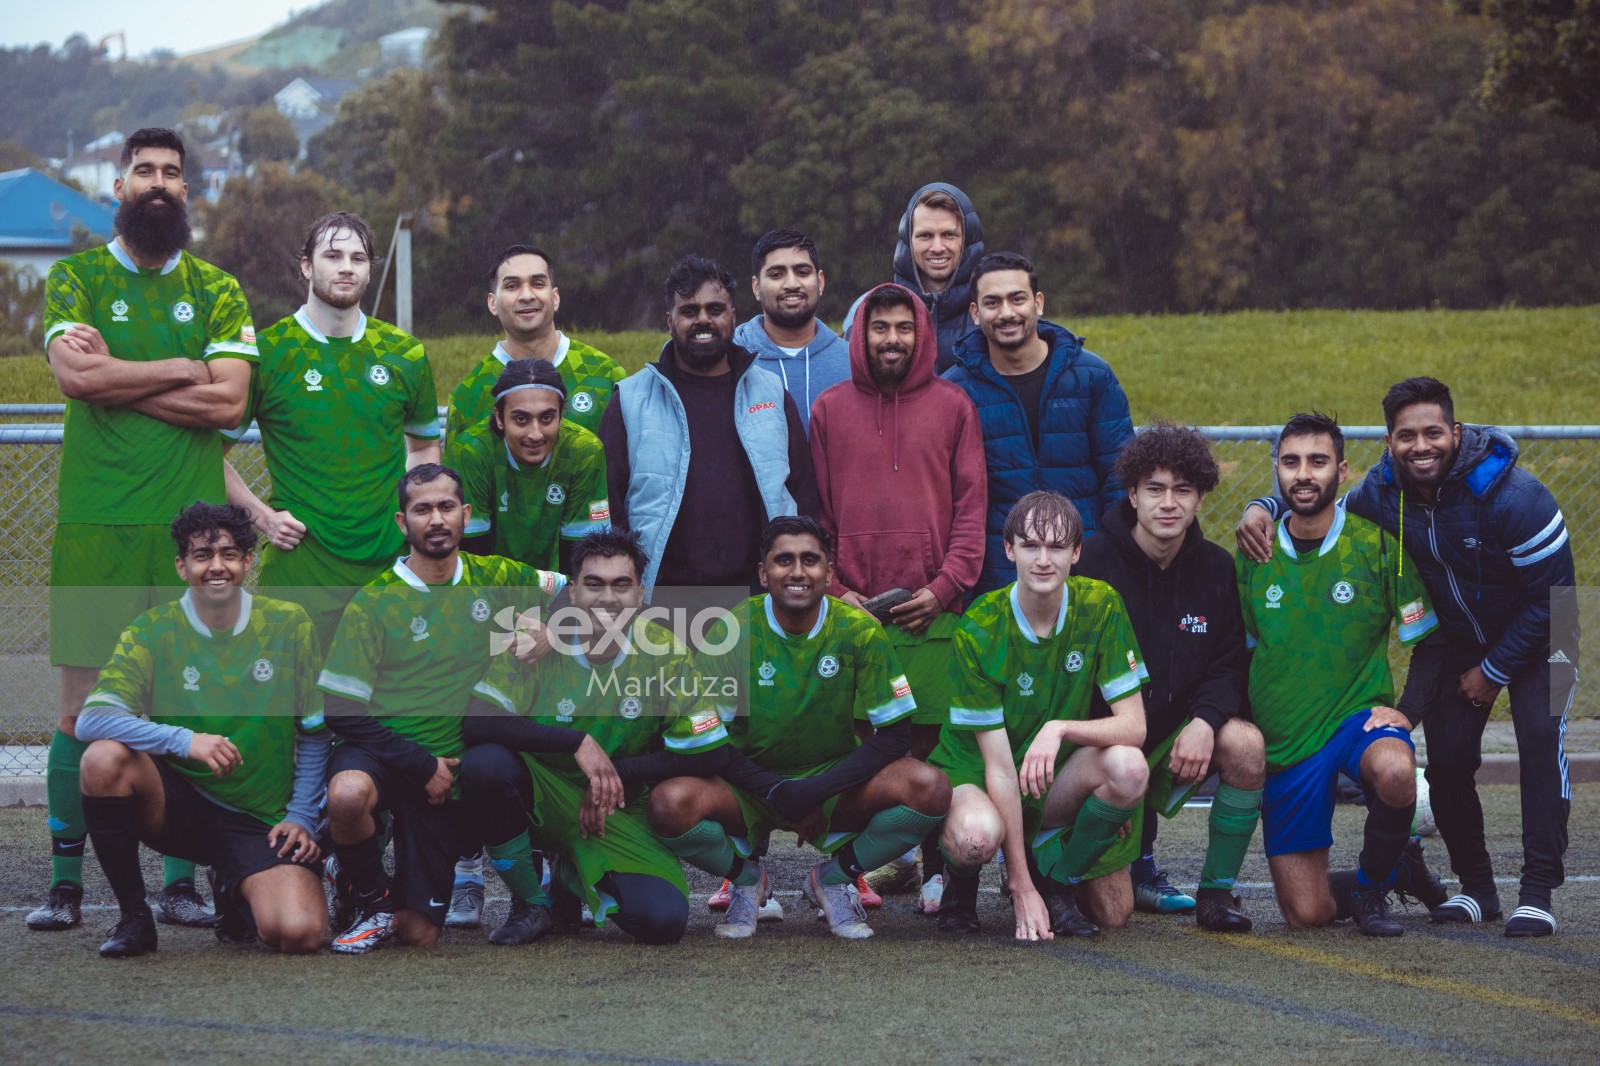 Football team in green shirts group photo - Sports Zone sunday league